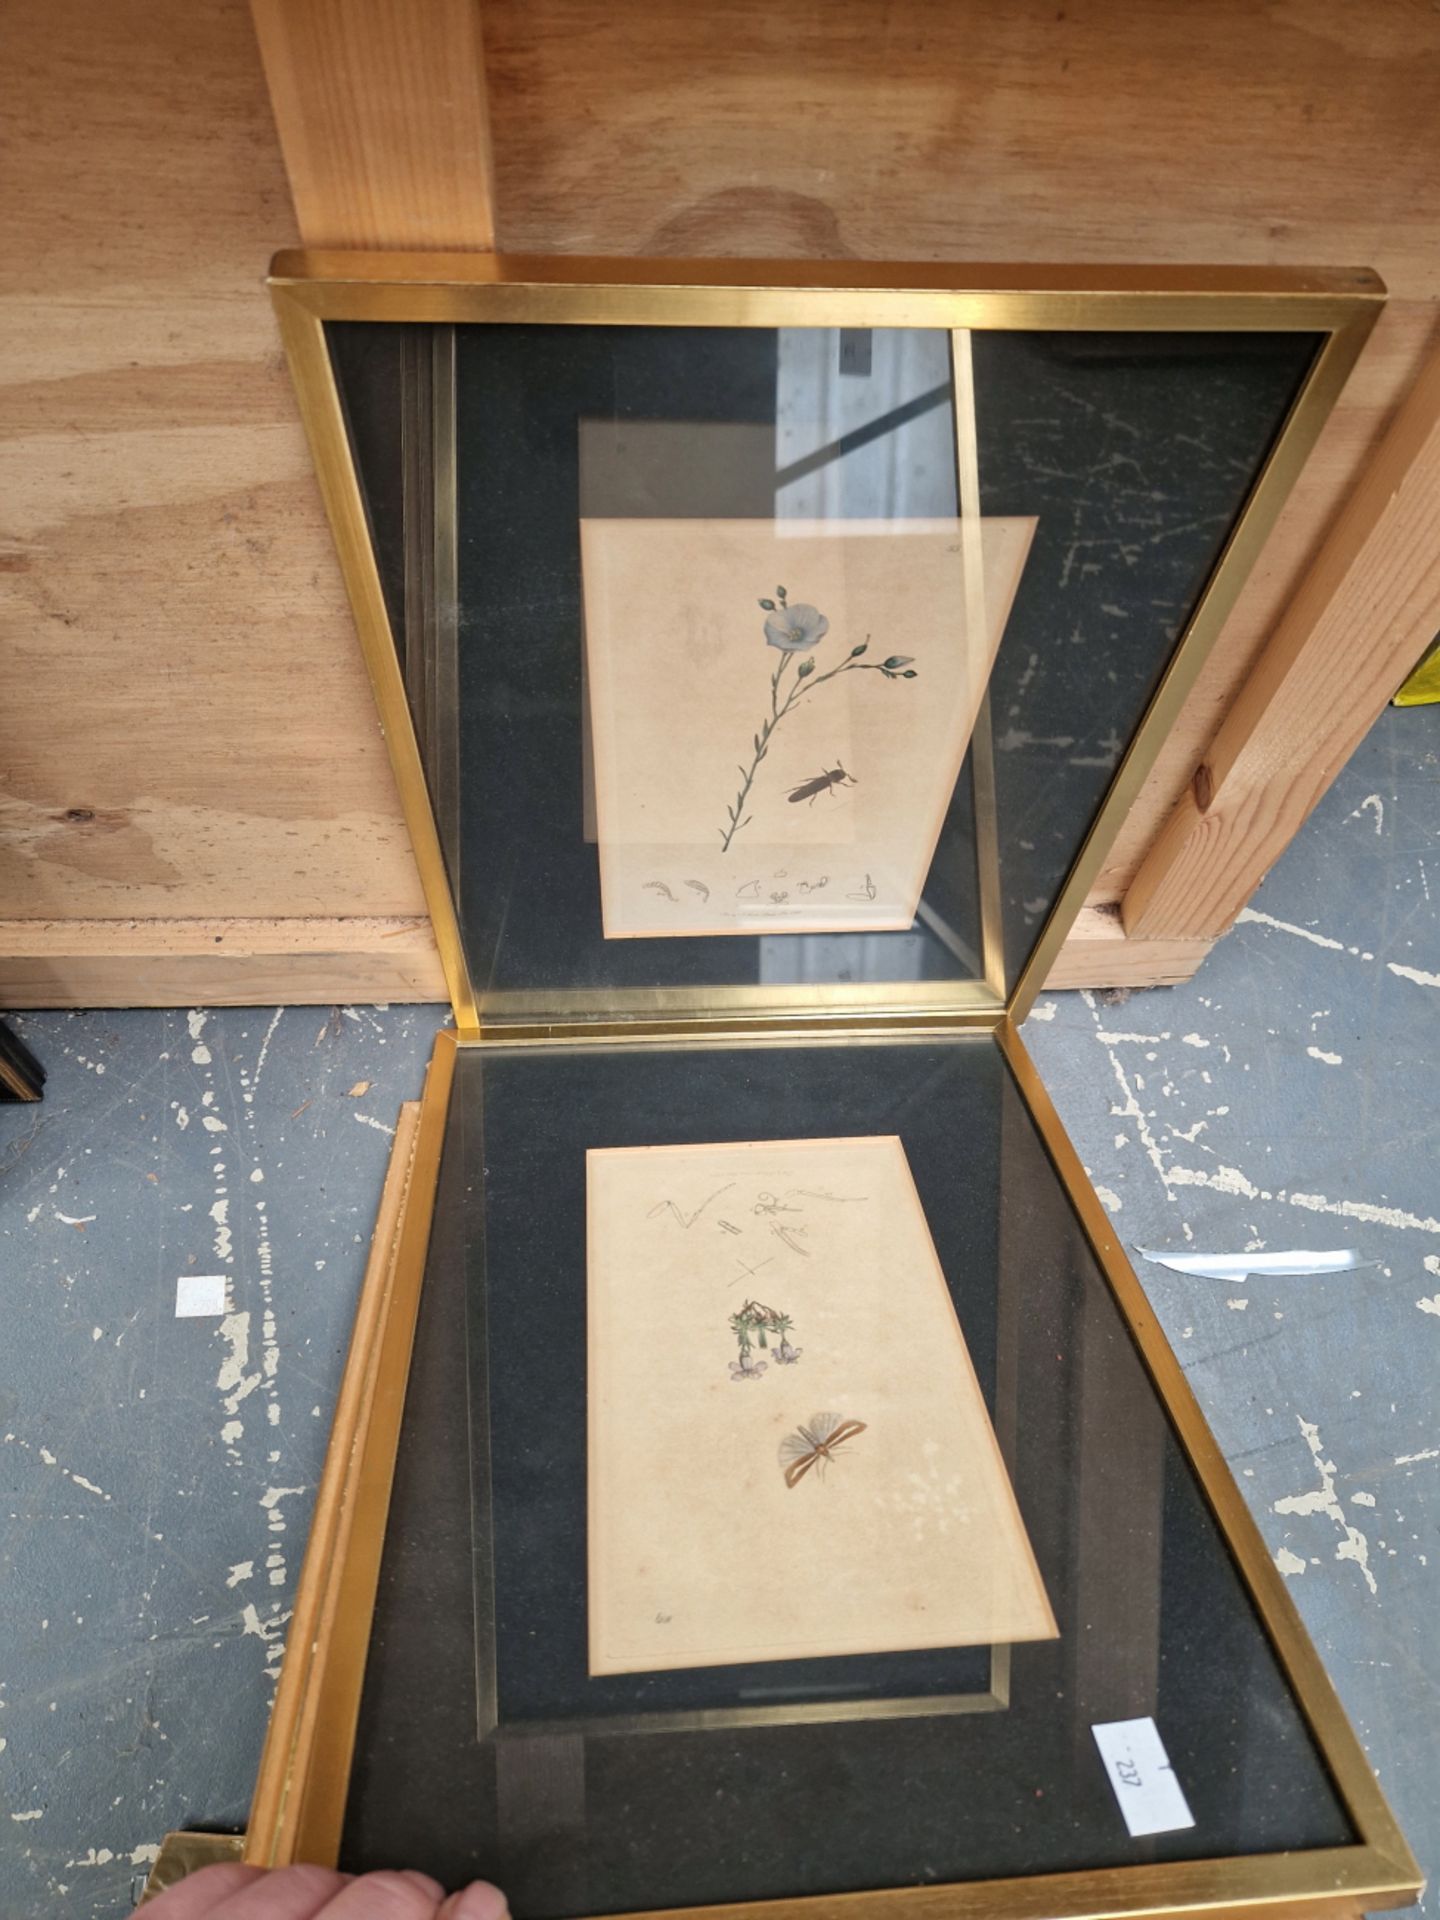 SIX 19th CENTURY HAND COLOURED BOTANICAL PRINTS, GILT FRAMES. TOGETHER WITH TWO WATERCOLOURS OF - Image 8 of 8